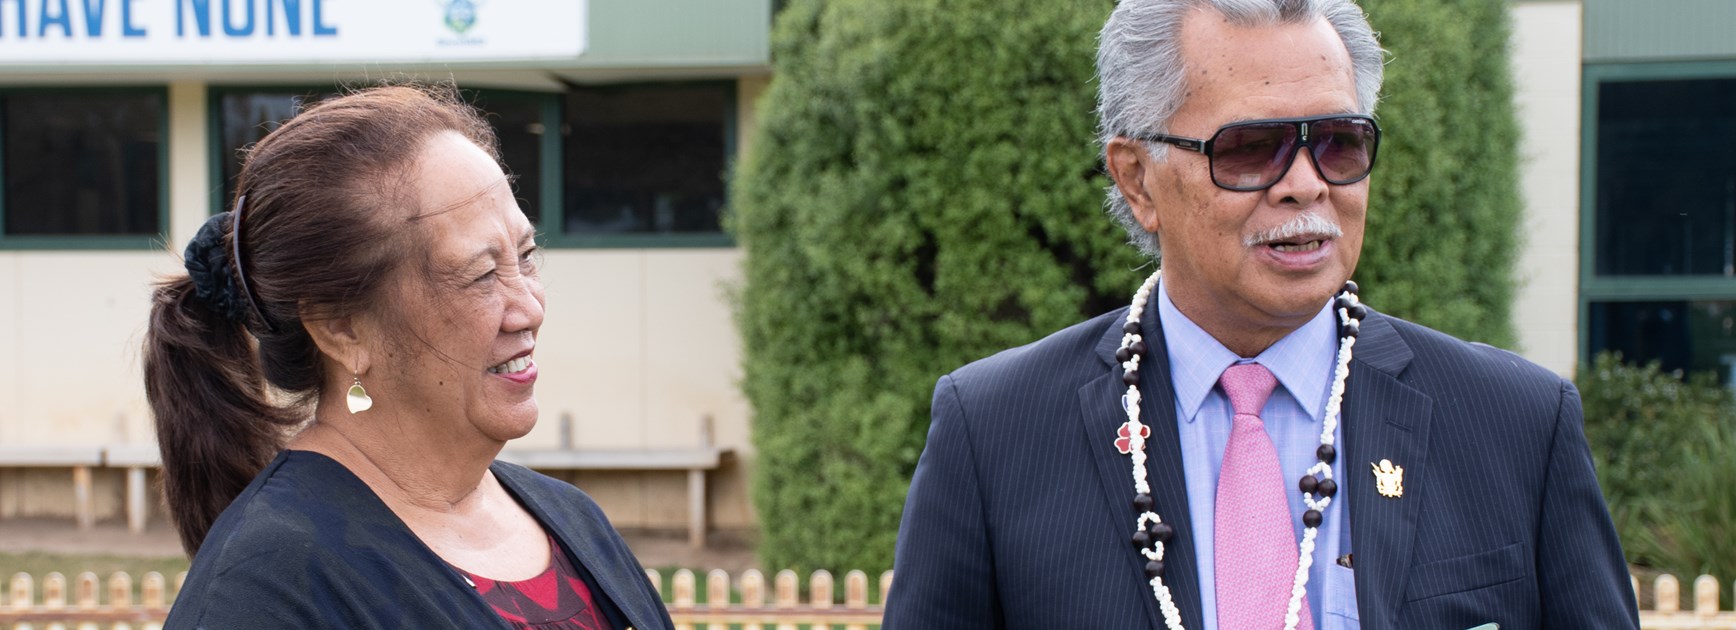 Cook Islands Prime Minister Visits the Raiders